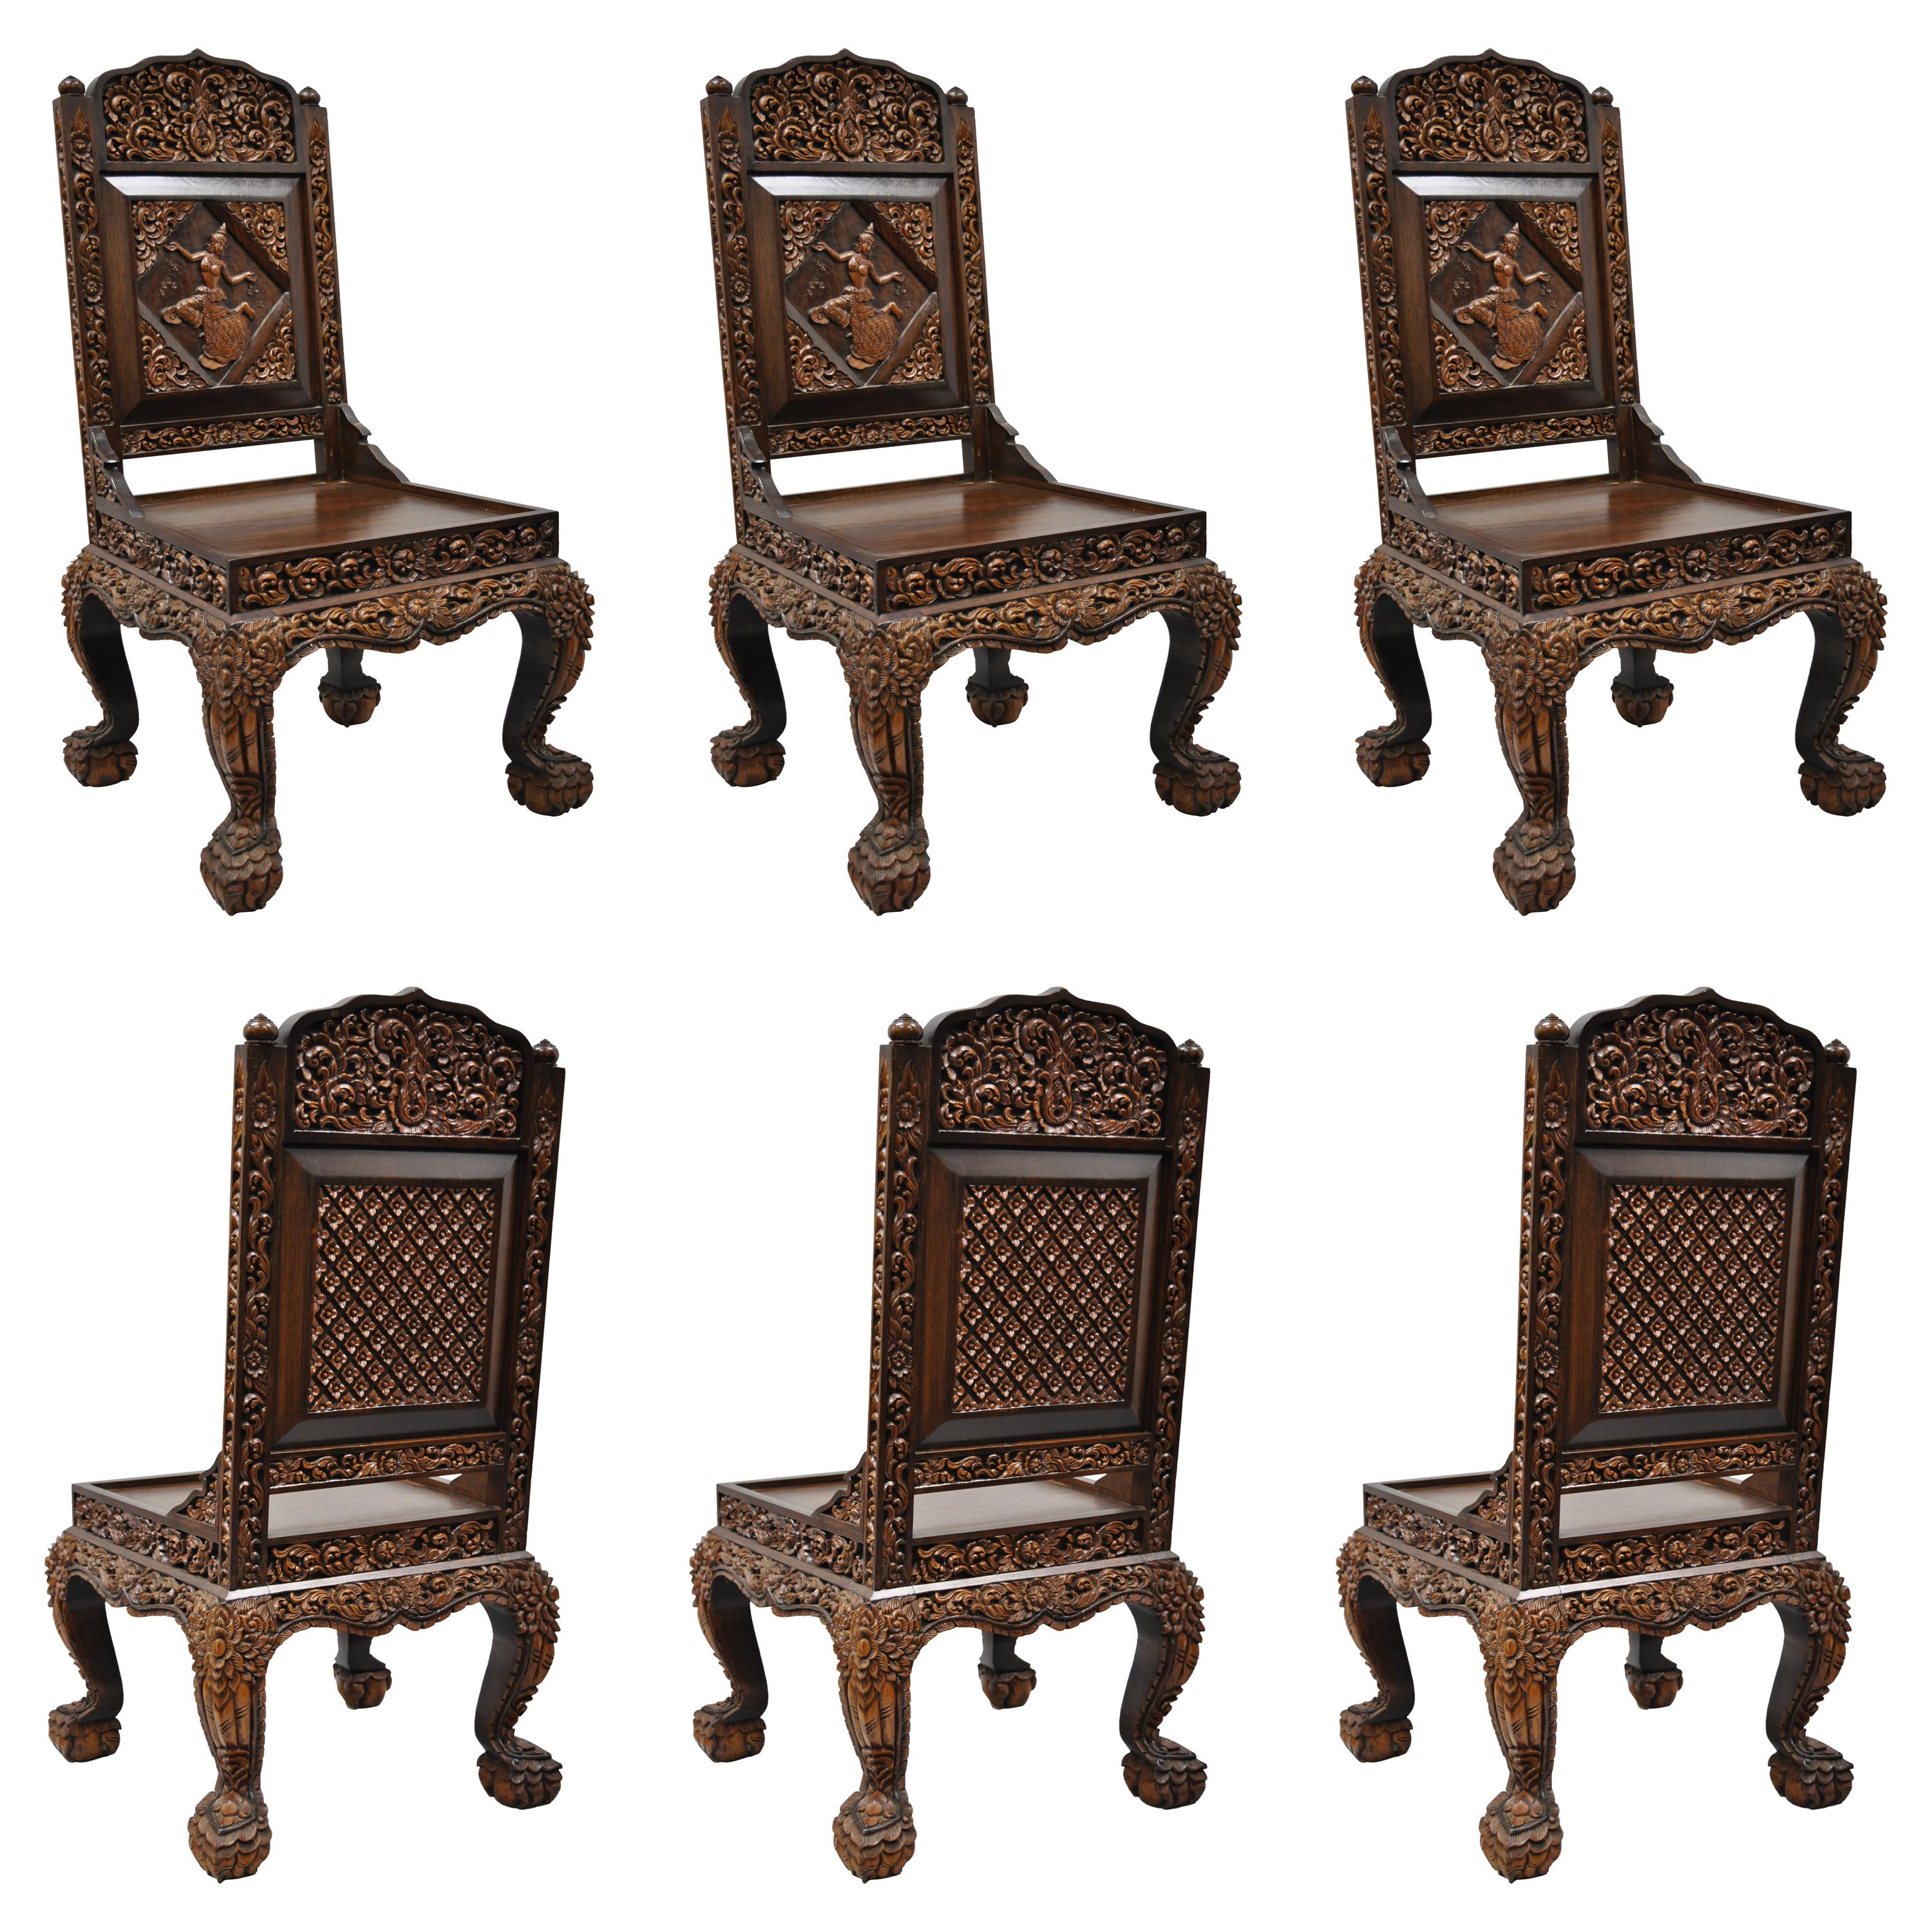 6 Hand-Carved Thai Oriental Teak Wood Dining Chairs with Dancing Female